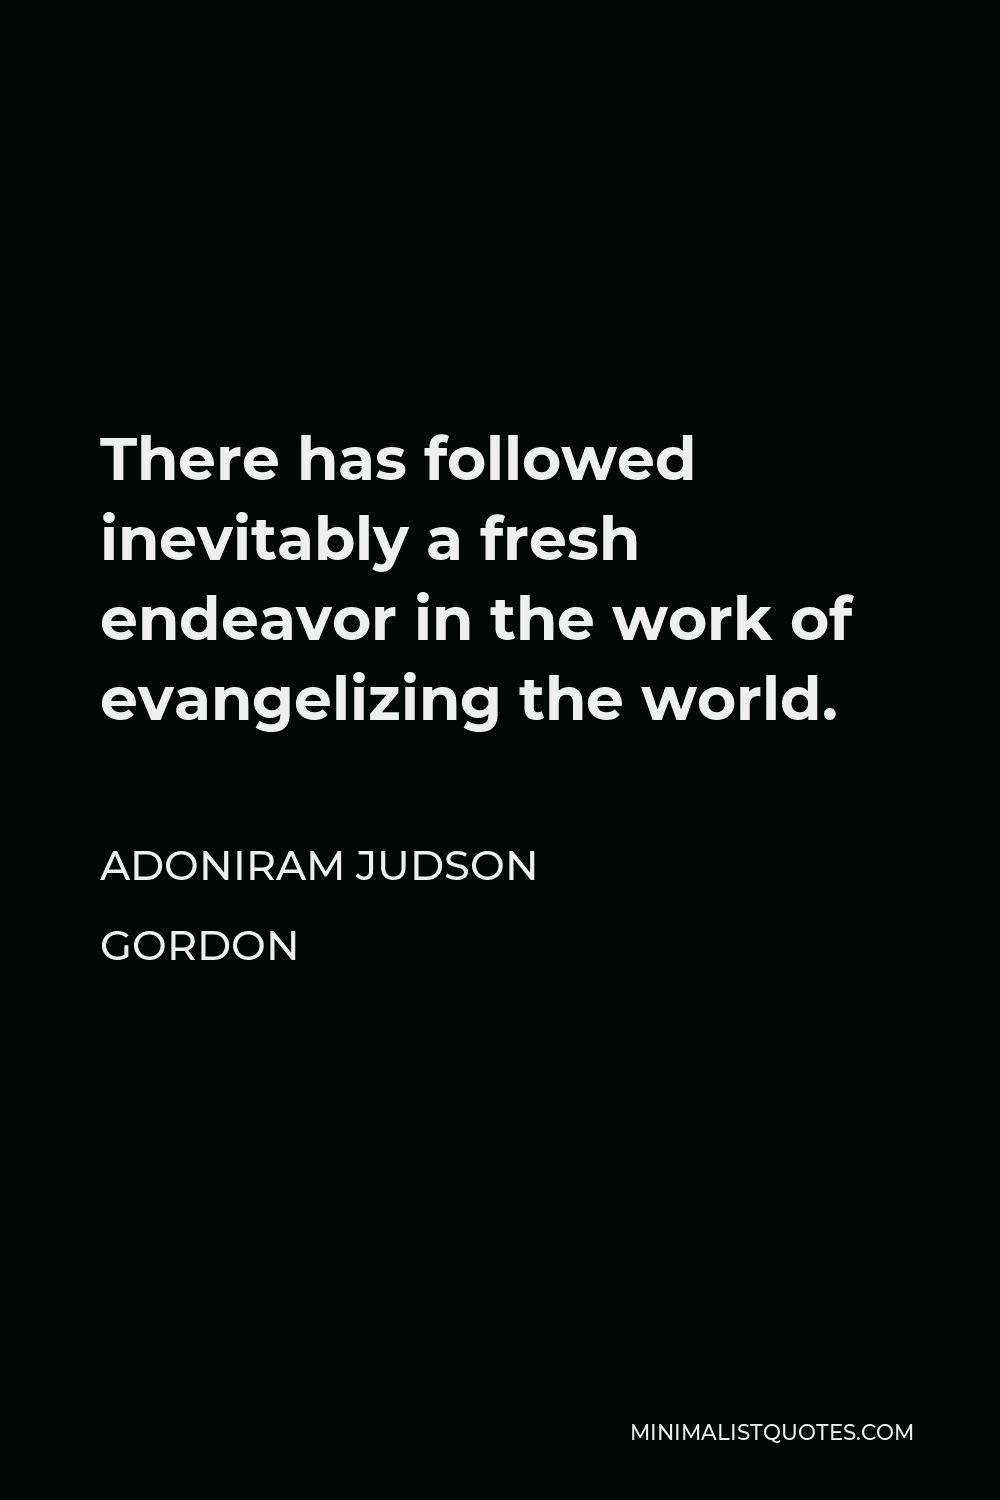 Adoniram Judson Gordon Quote - There has followed inevitably a fresh endeavor in the work of evangelizing the world.